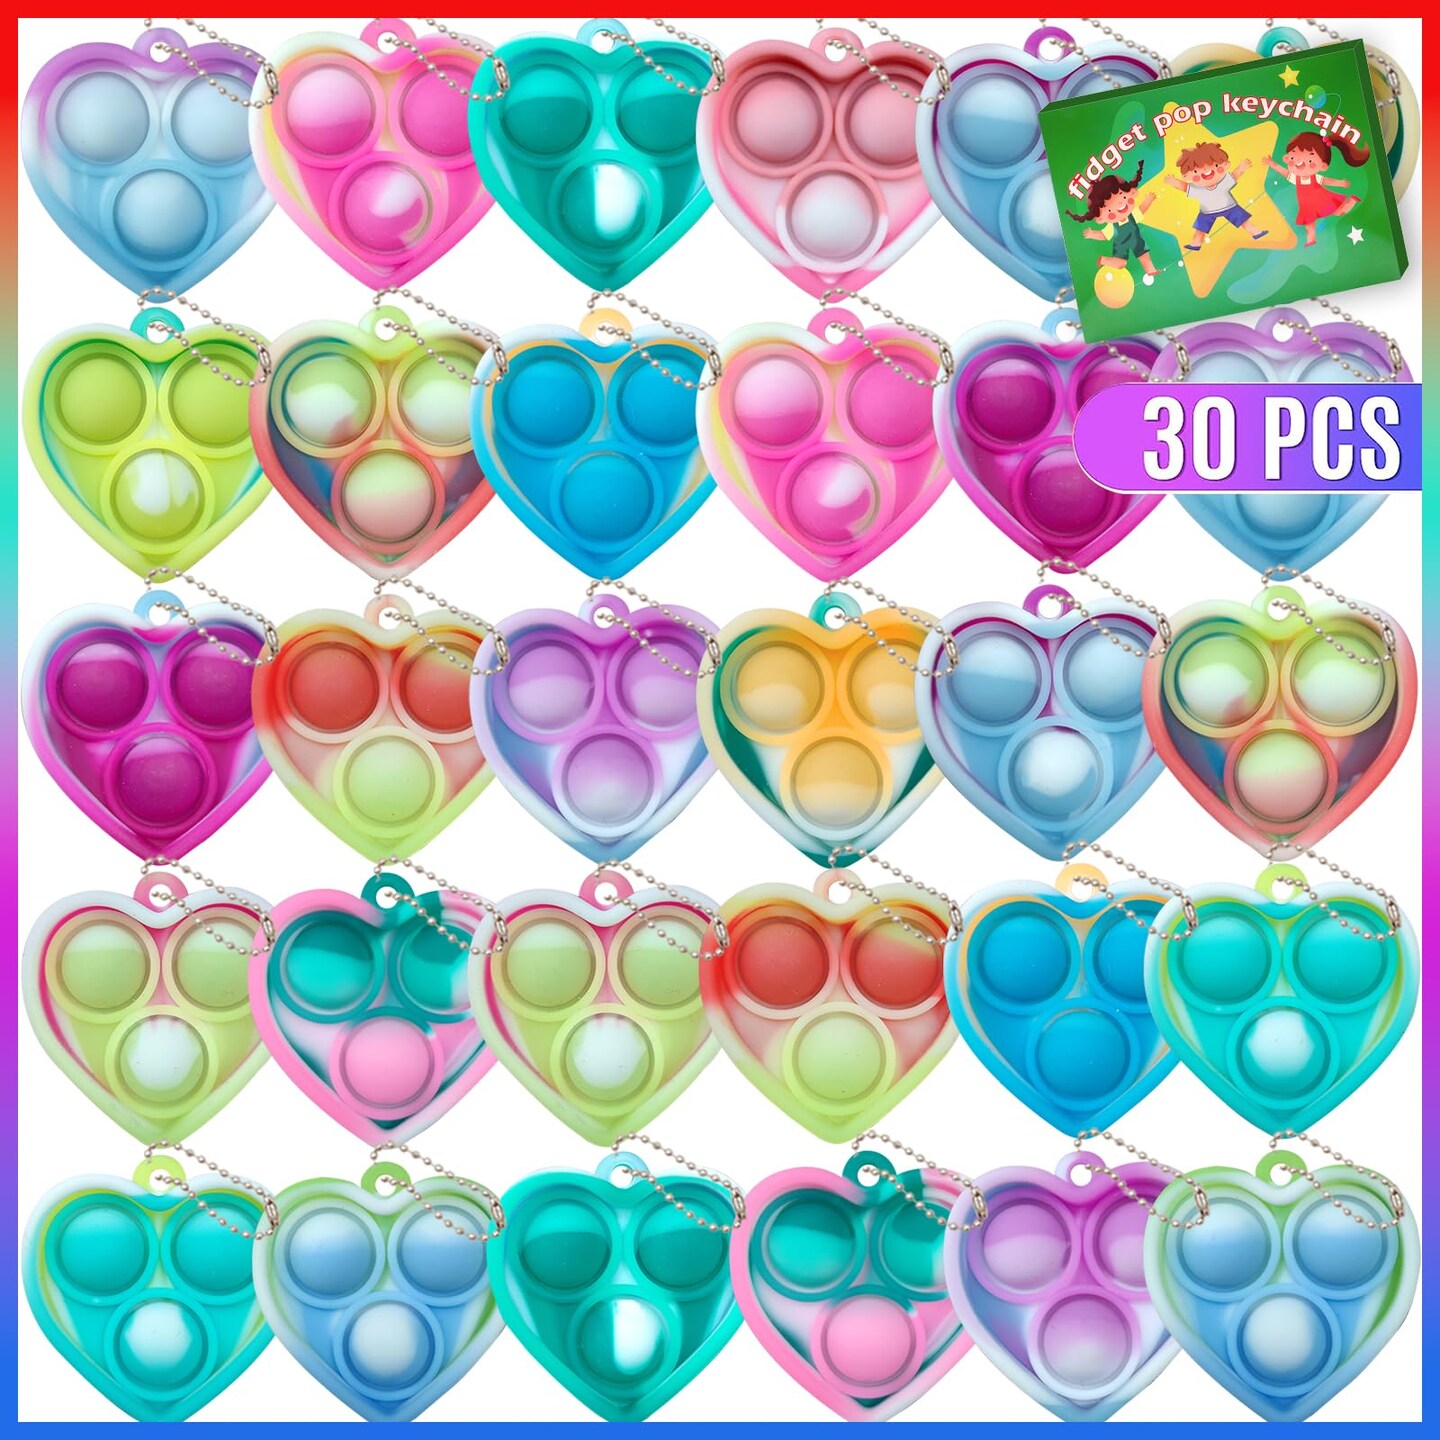 Valentines Day Gifts for Kids,192 Pcs Kids Valentines Day Gifts for School,Stati